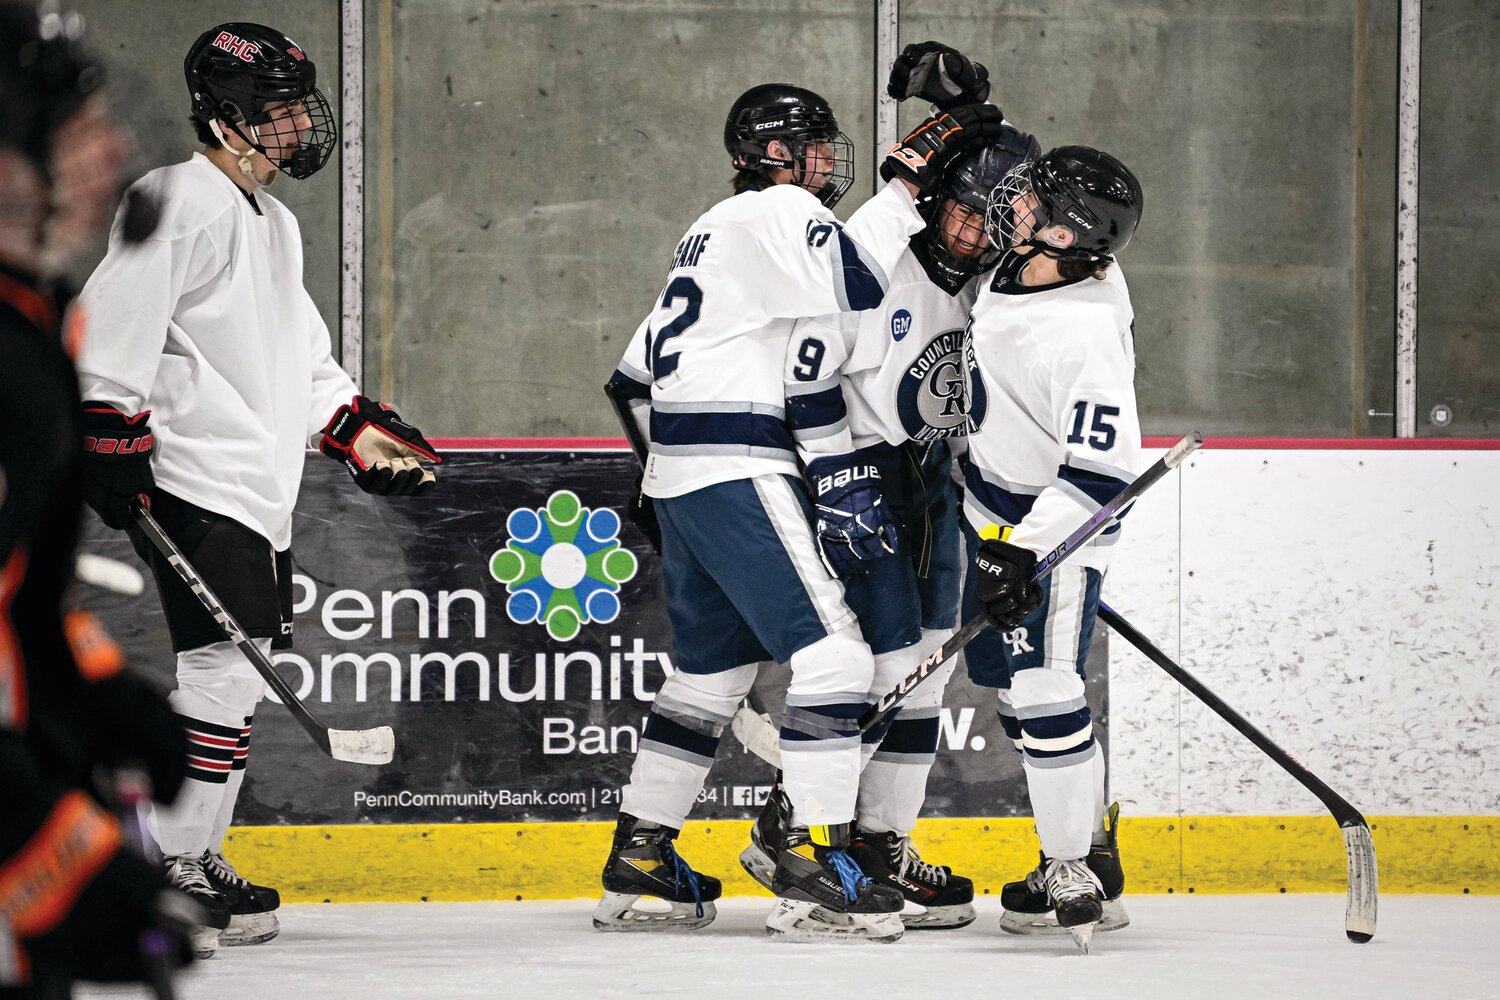 Christian Funk gets congratulated after scoring his first goal of the season, making it 3-1 in the second period.